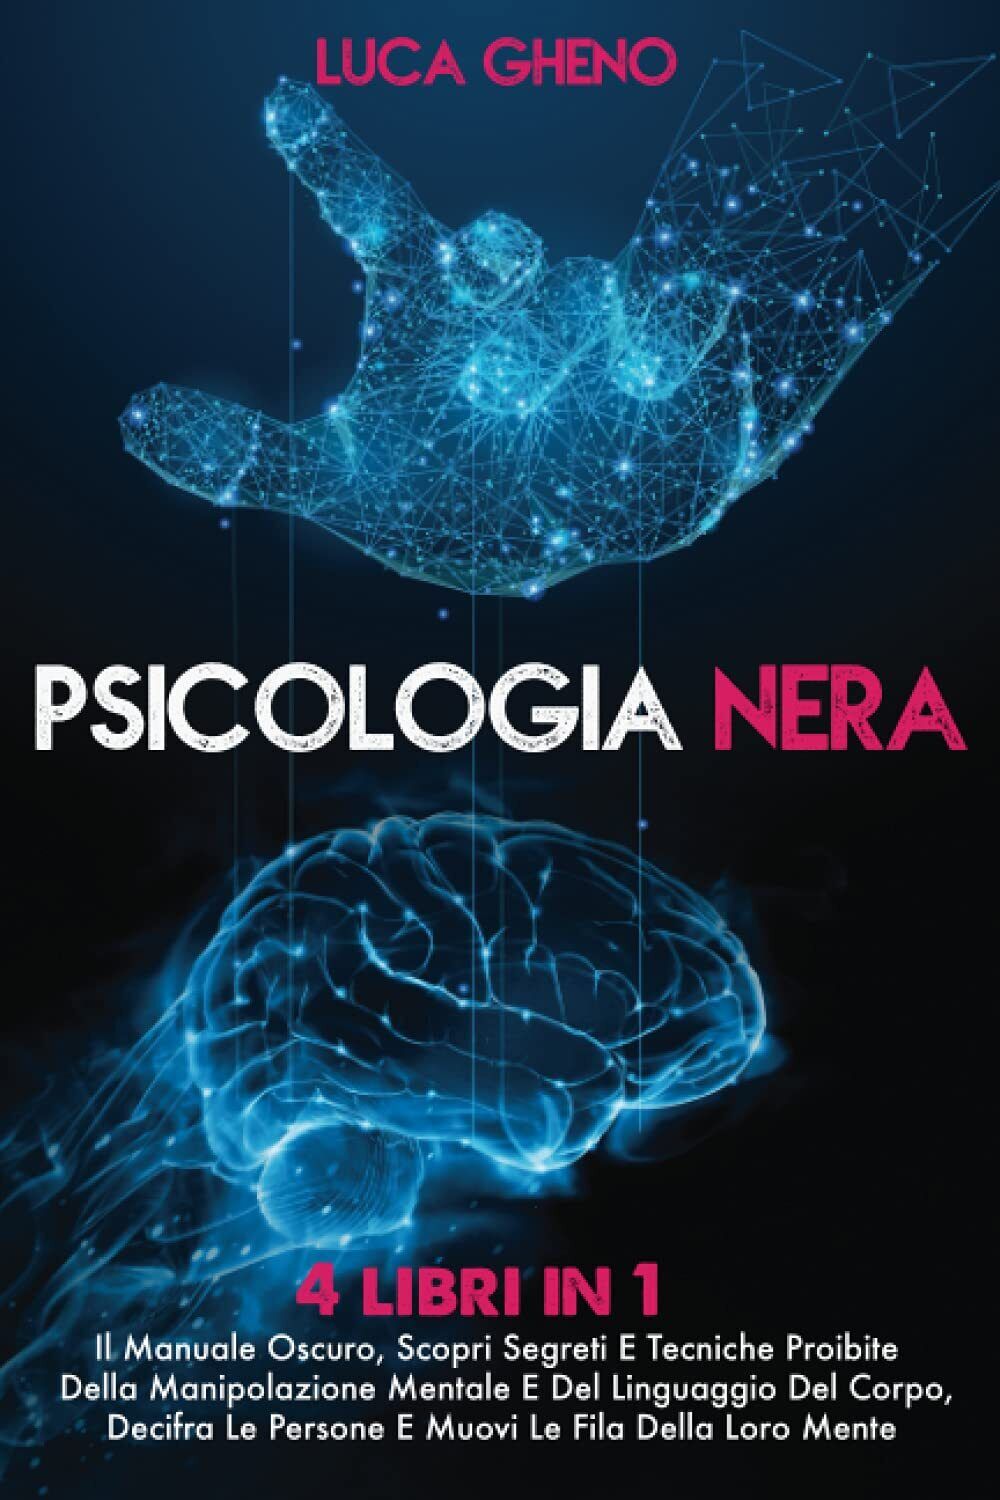 PSICOLOGIA NERA: 4 Libri in 1 - LUCA GHENO - ?Independently, 2021 